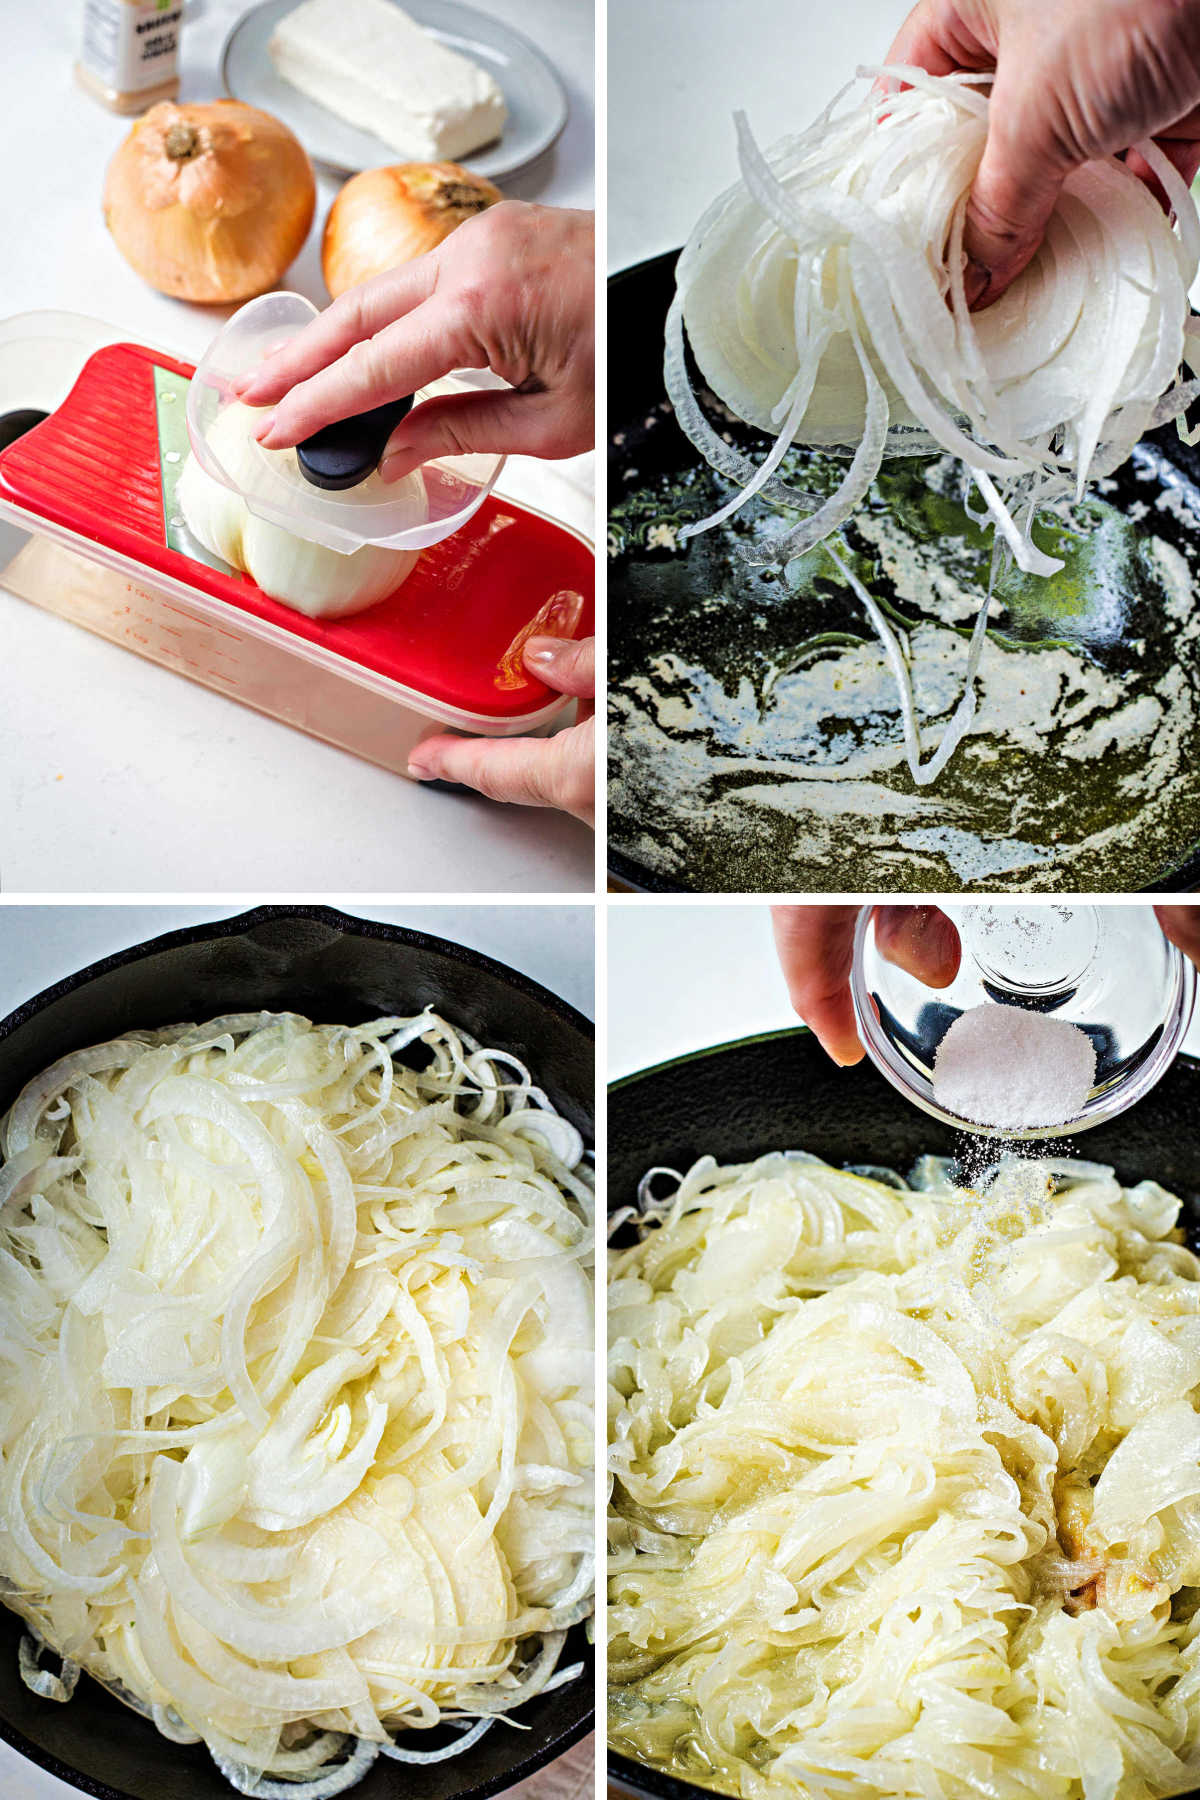 process steps for making caramelized onion dip: slide onions with mandoline; add onions to skillet with butter; sprinkle sugar on onions.